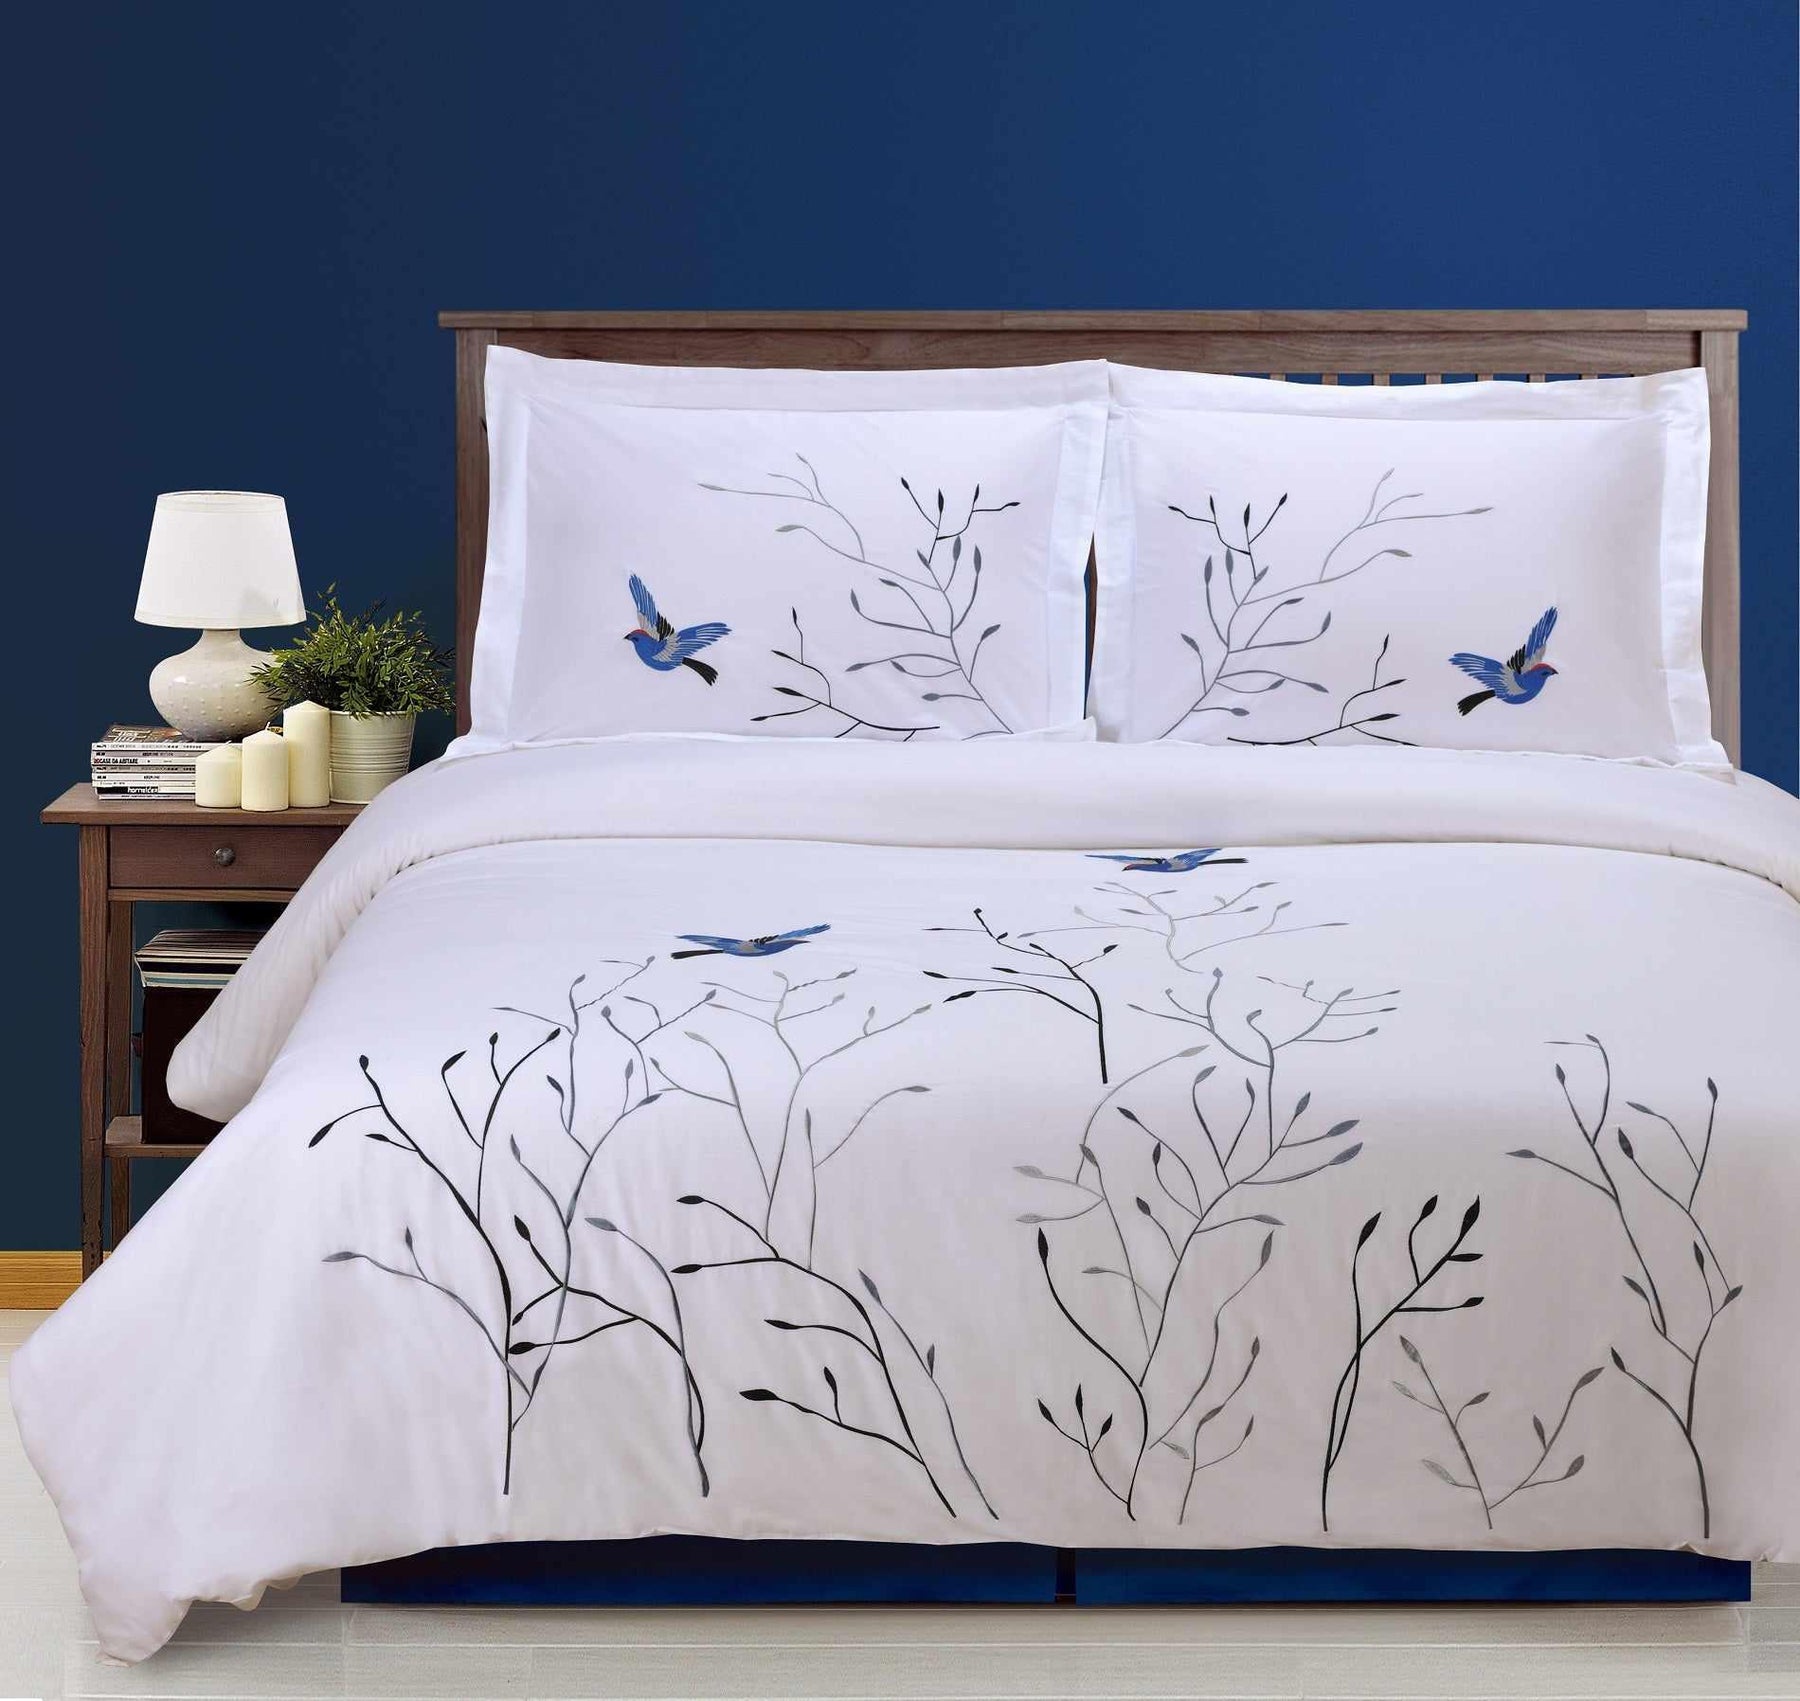 Superior Embroidered Swallow and Floral Cotton Duvet Cover Set - Medium blue